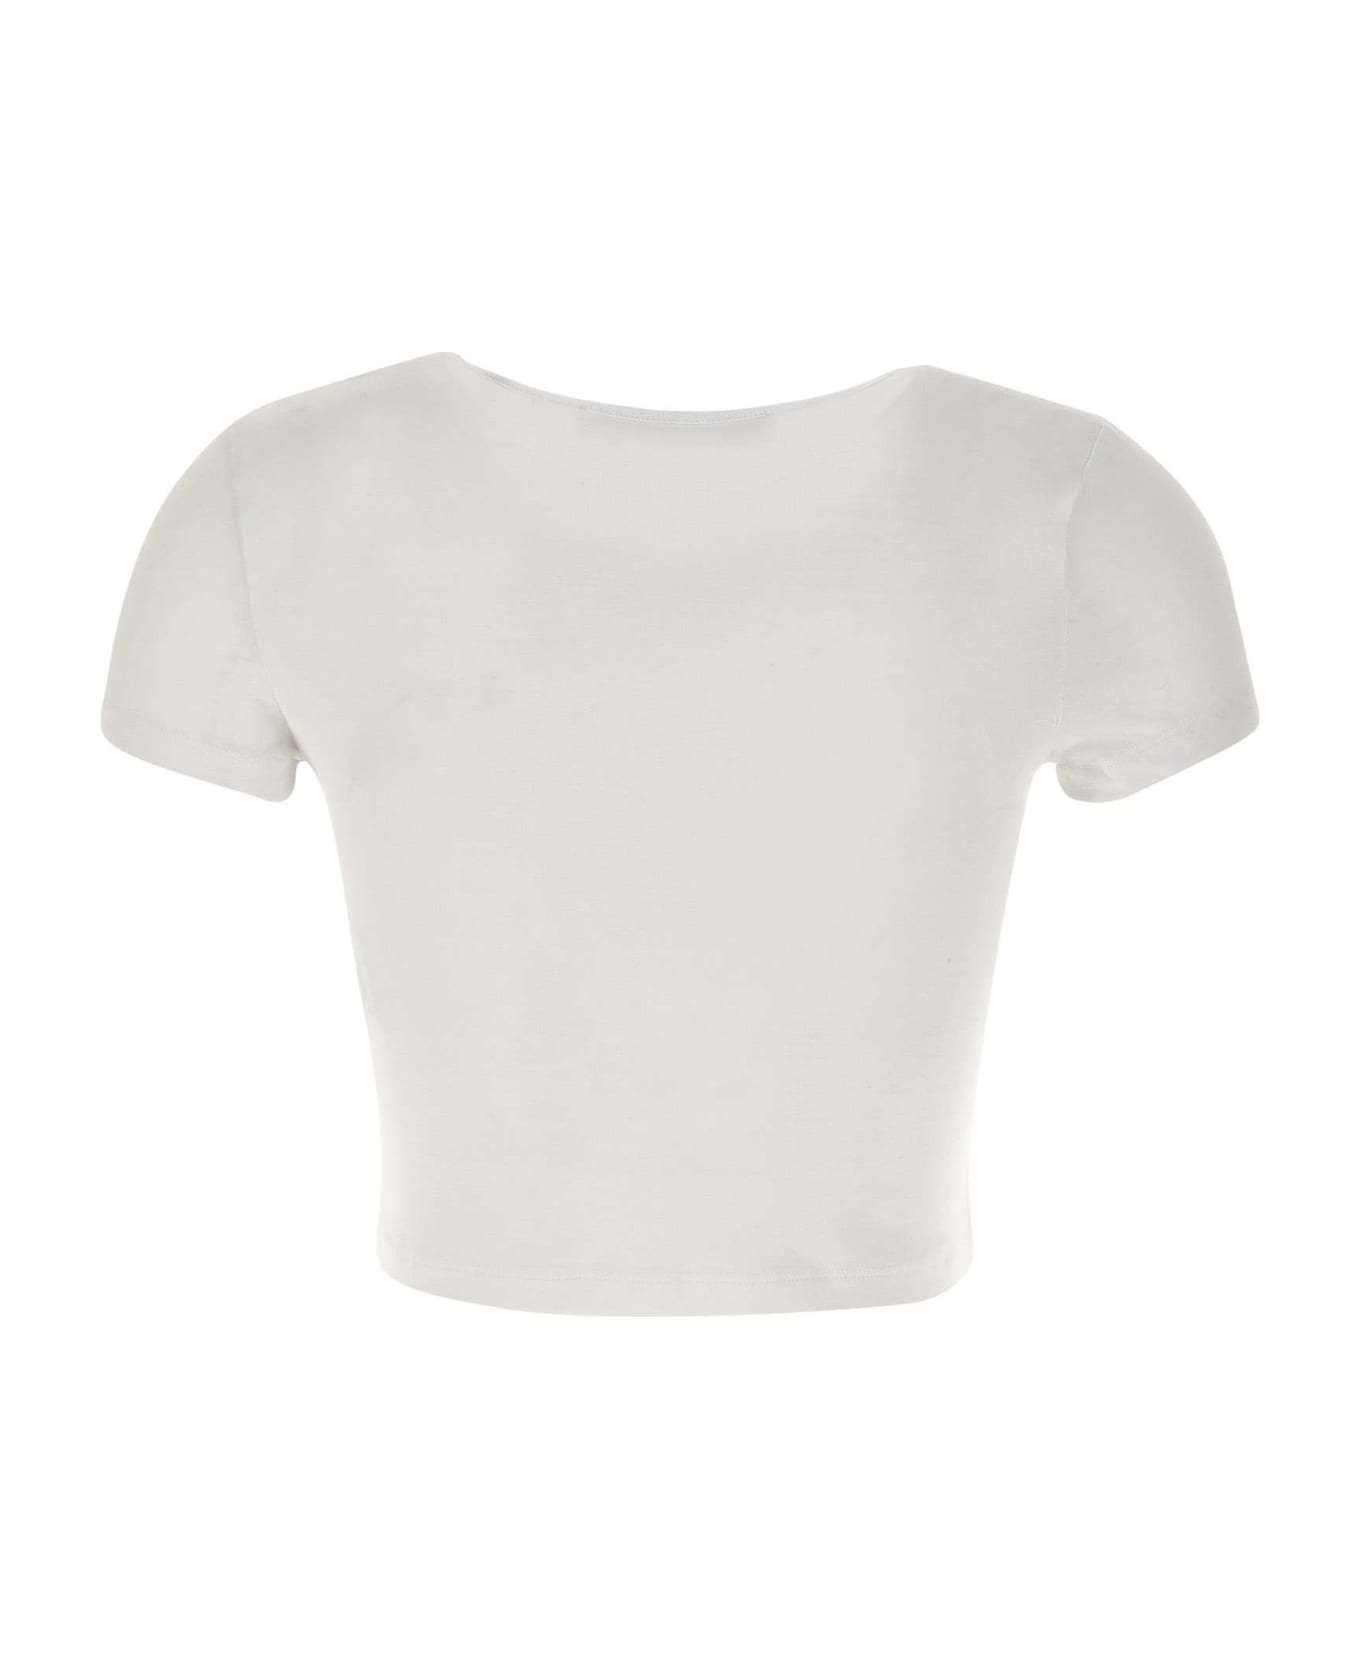 Rotate by Birger Christensen "may" Top - WHITE